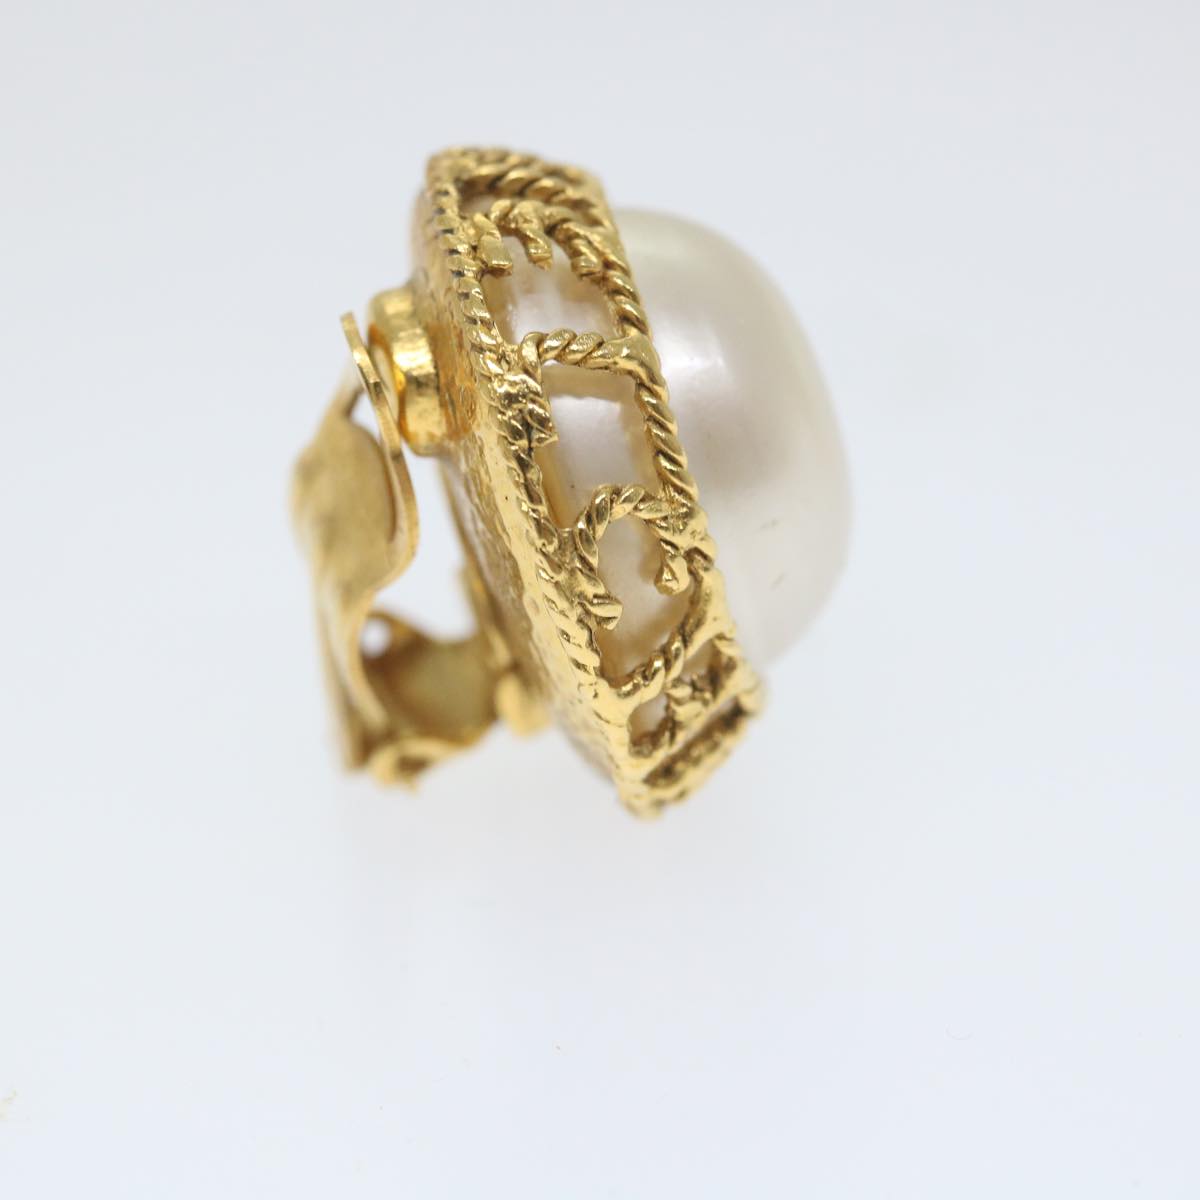 CHANEL Earring Metal Gold Tone CC Auth hk902